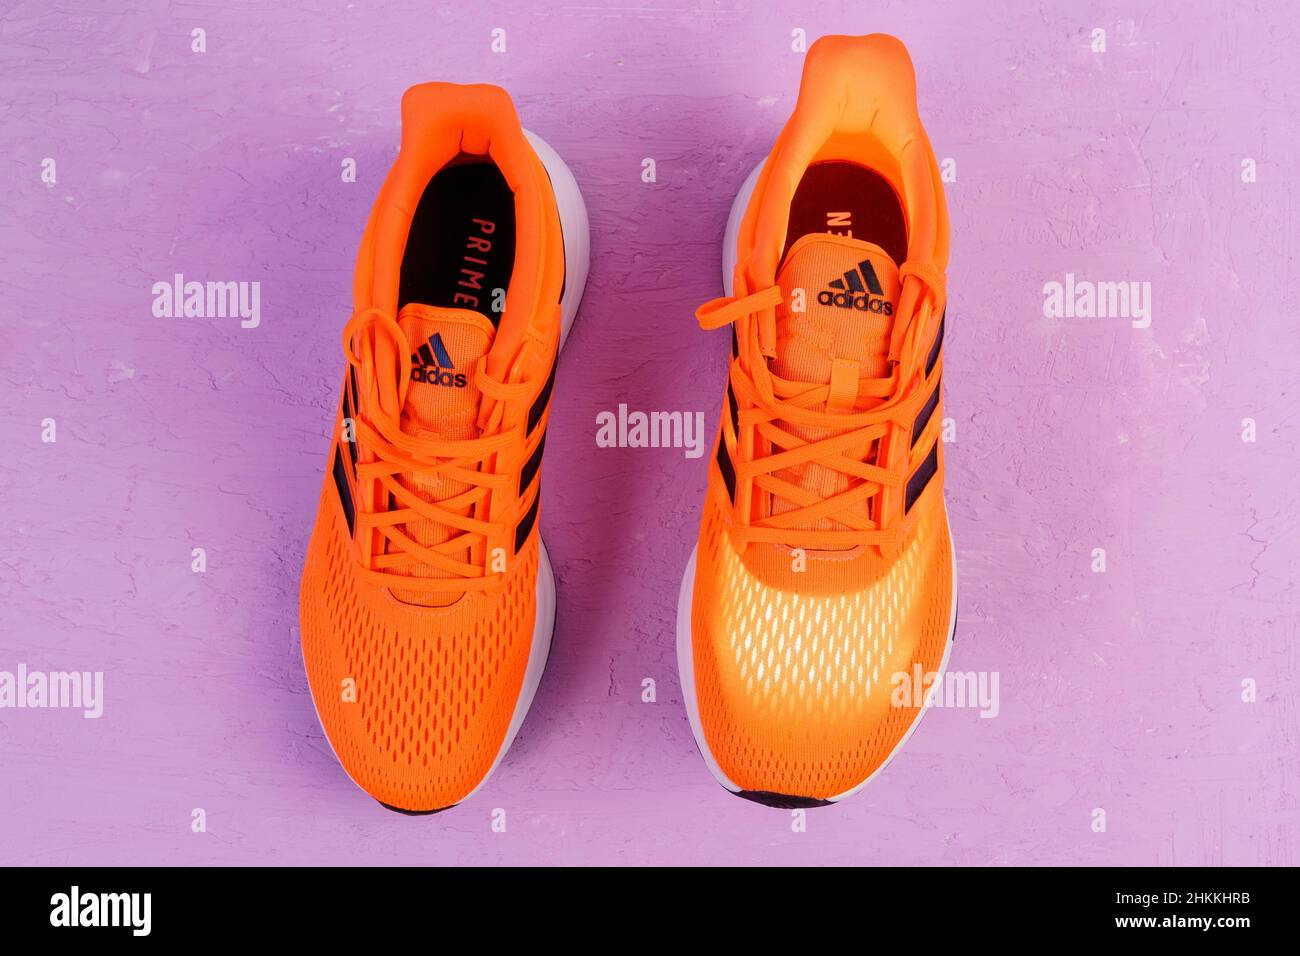 Page 4 - Adidas Logo High Resolution Stock Photography and Images - Alamy